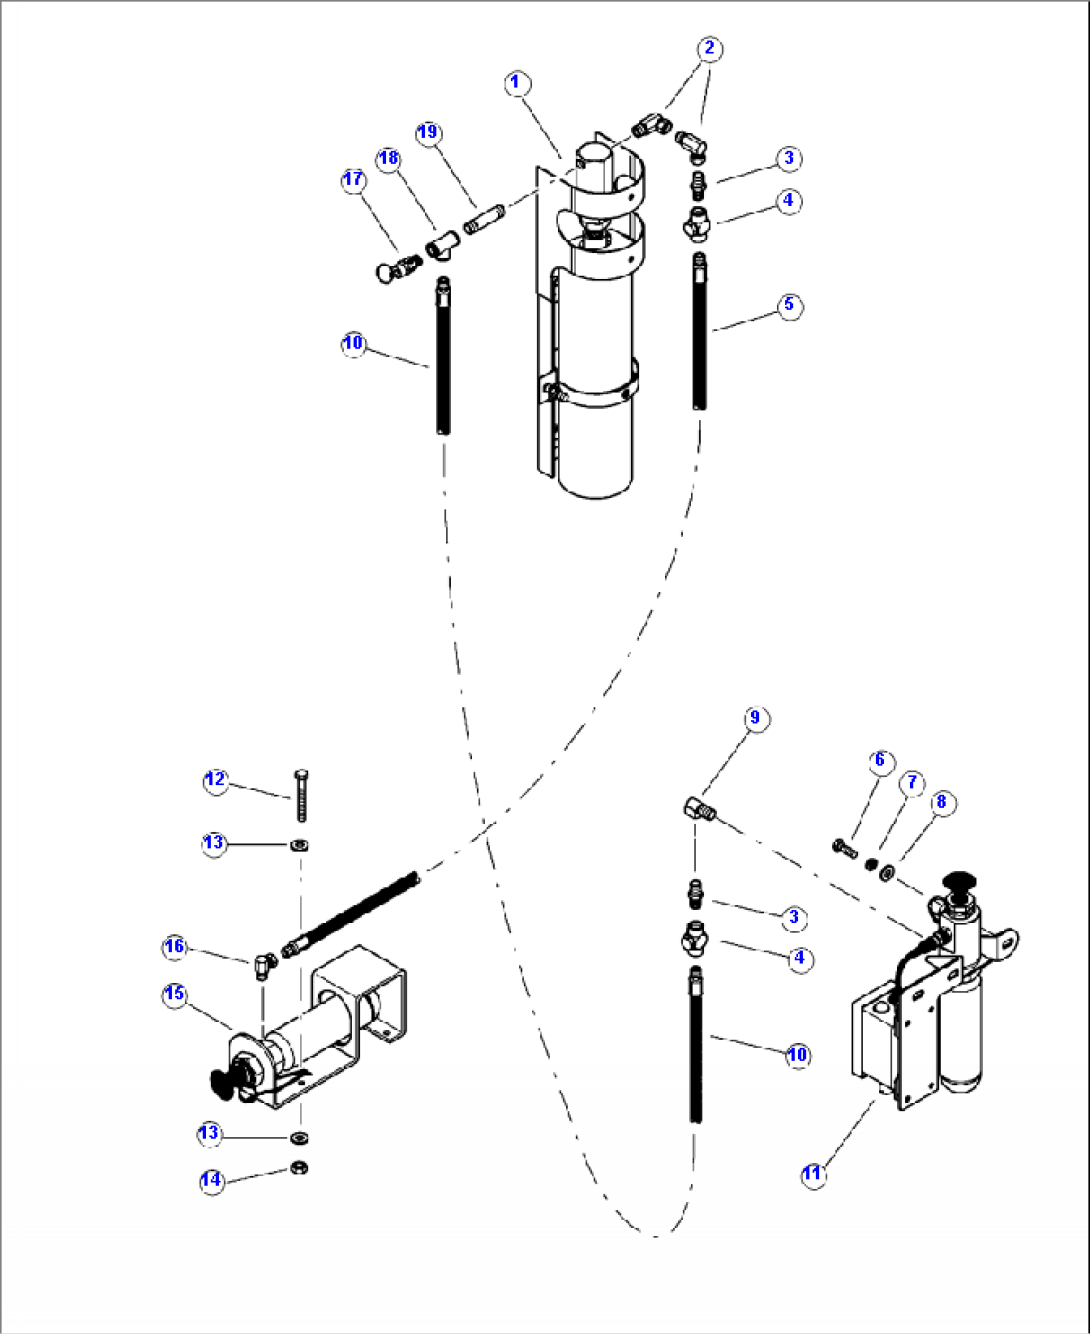 V0100-06A0 FIRE SUPPRESSION SYSTEM MANUAL ACTUATOR PIPING